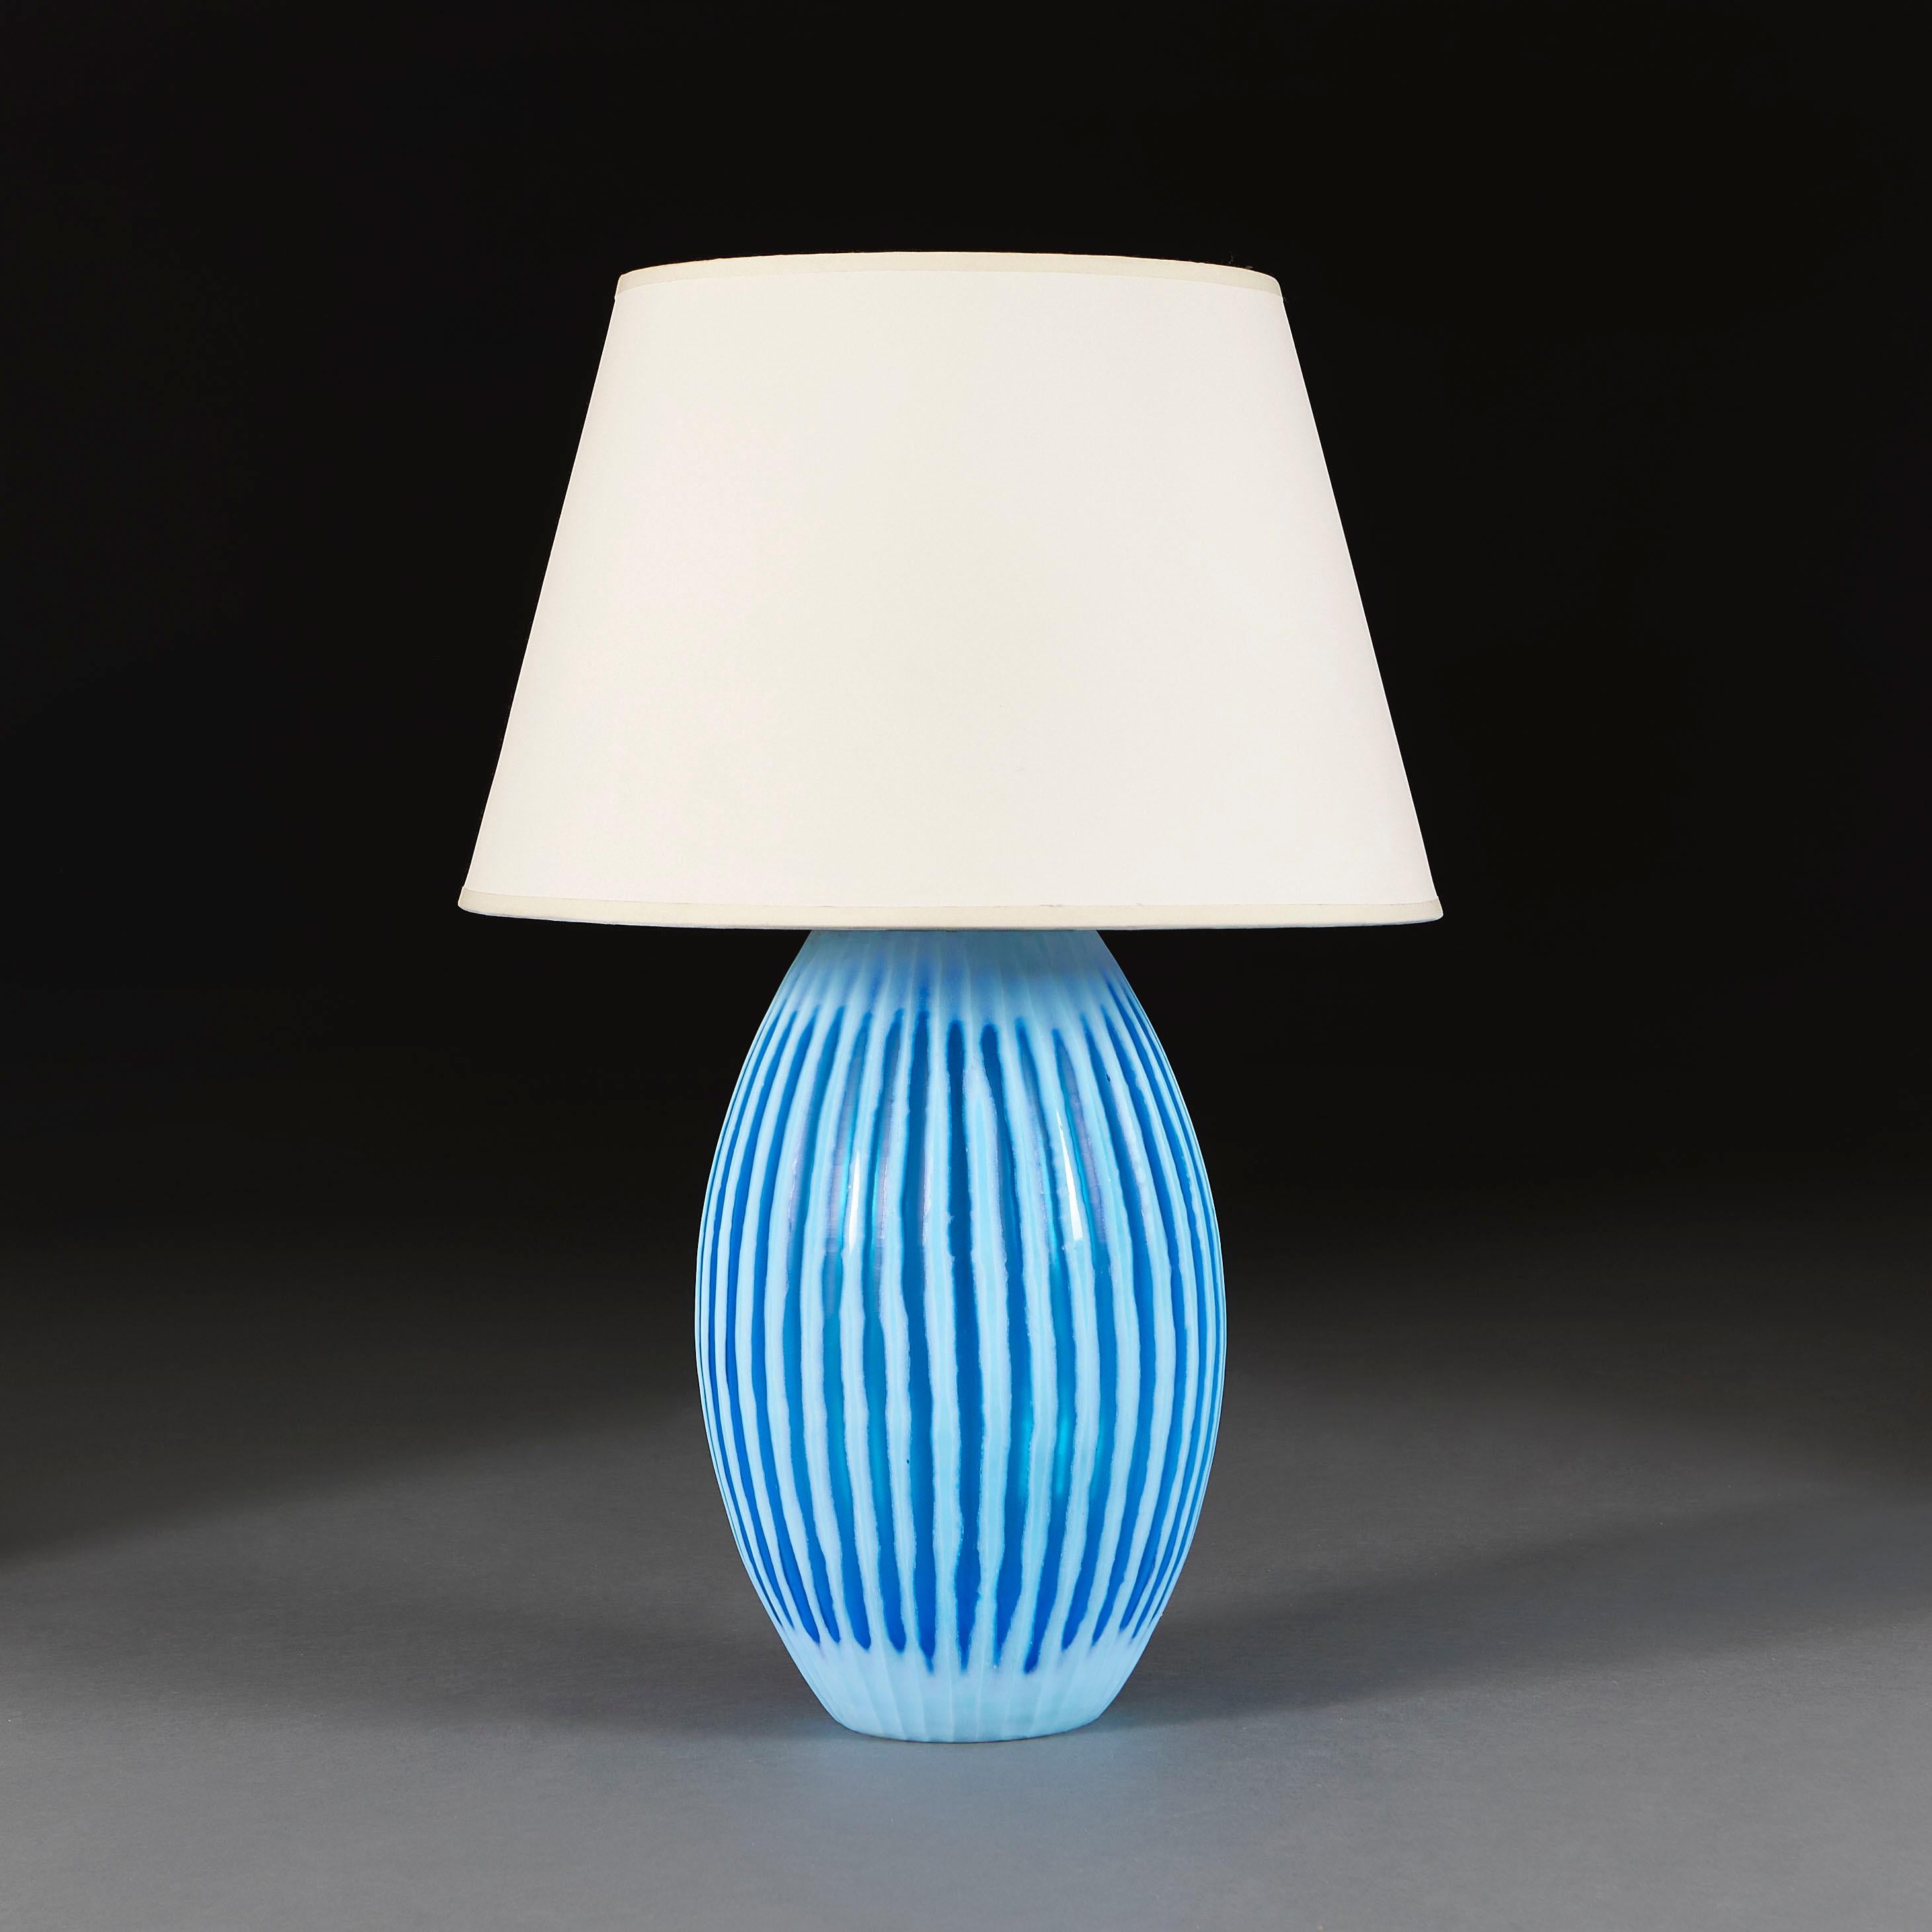 Italy, circa 1960

A midcentury large Murano glass vase in blue glass, of gadrooned oval form, now as a lamp.

Height of vase 38.00cm
Height with shade 67.00cm
Diameter of base 13.00cm
Diameter of body 24.00cm

Please note: This is currently wired